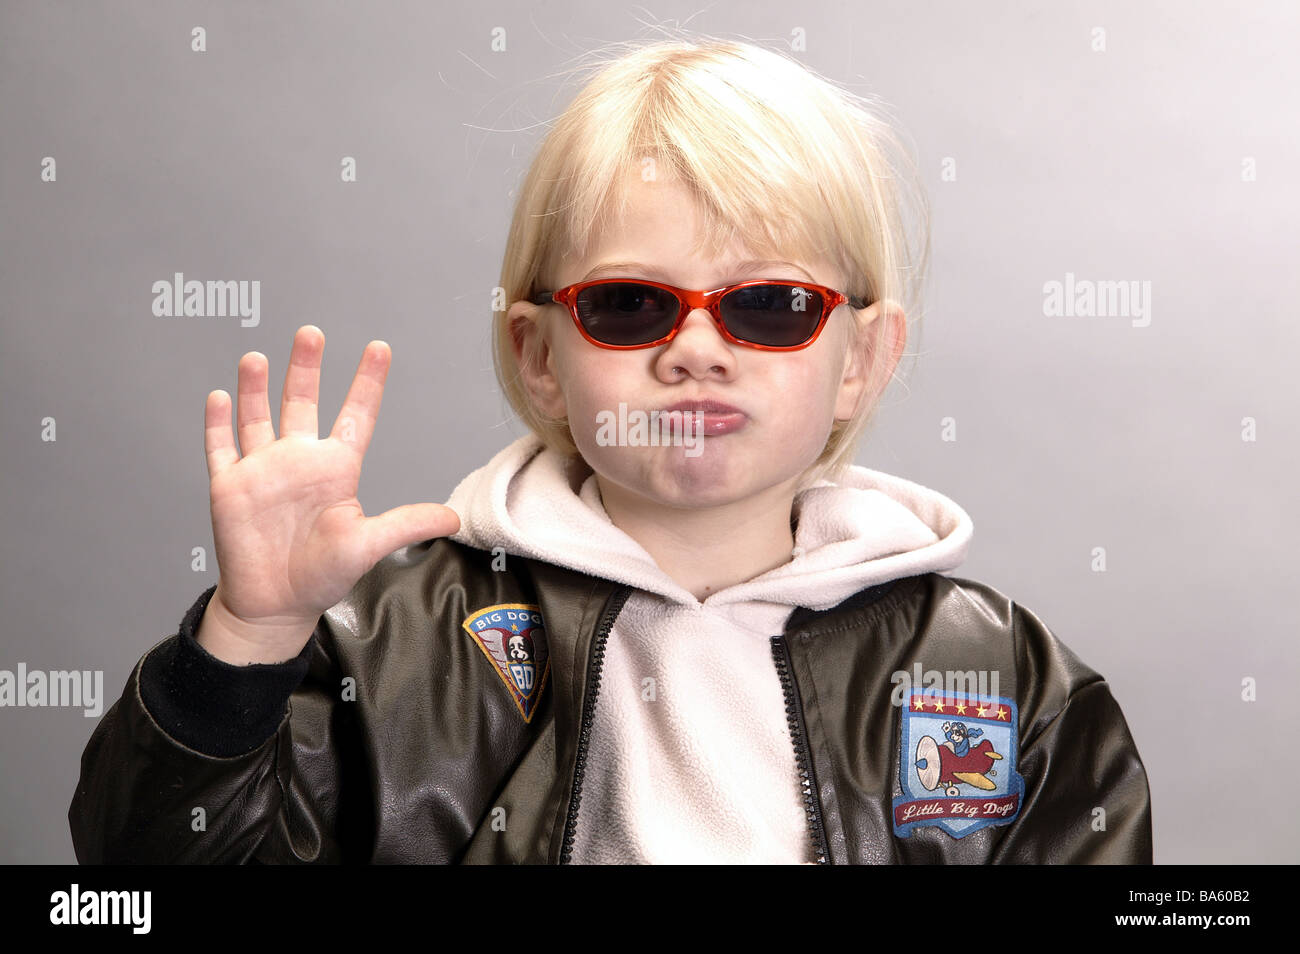 Child sun glass leather-jacket grimace portrait waves boy childhood fun expression facial expression Schnute glasses Stock Photo